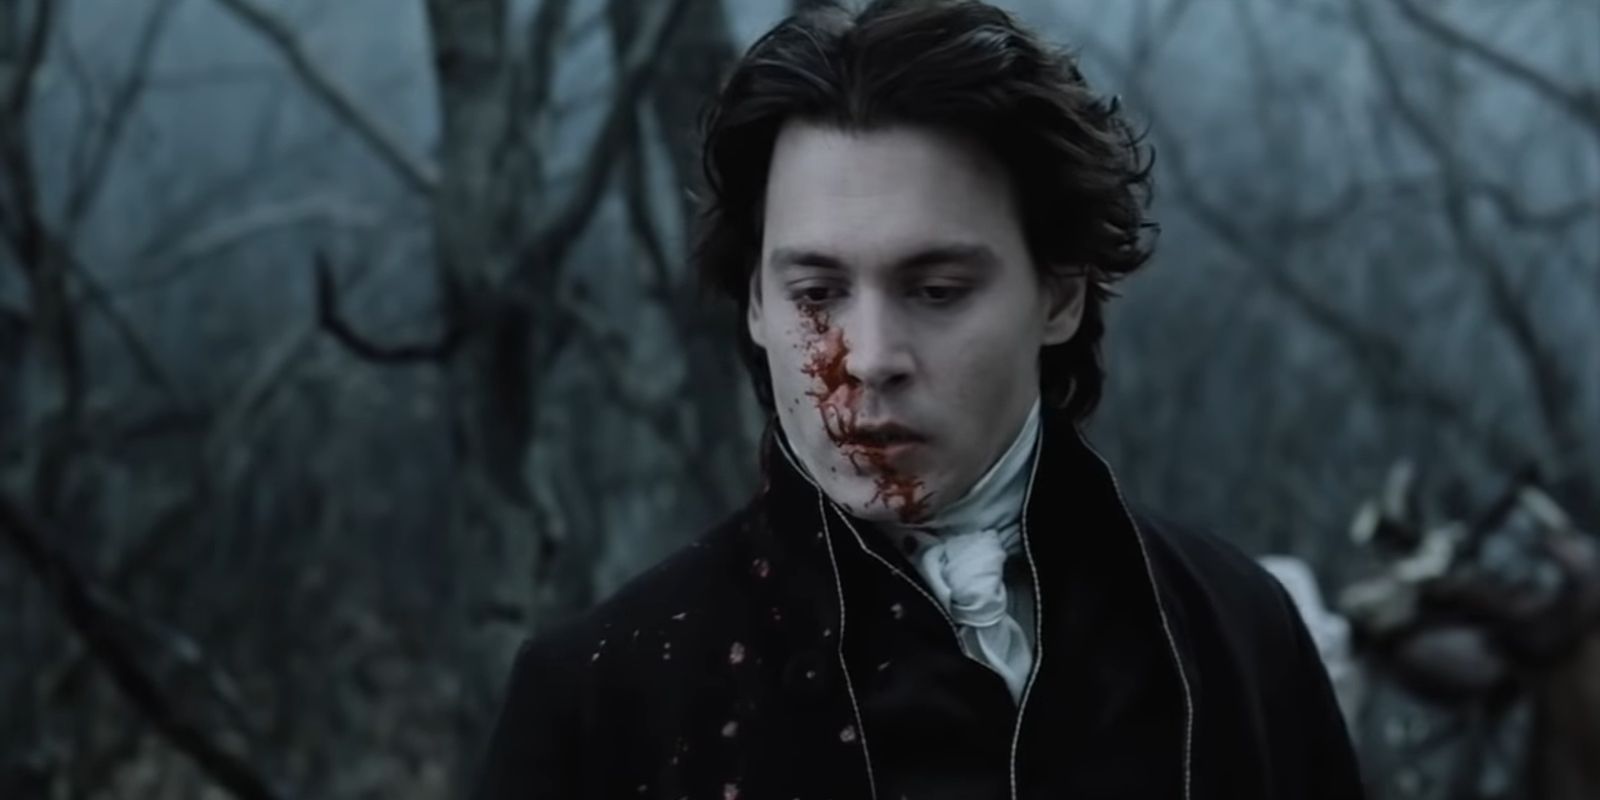 Ichabod Crane with blood on his face in Tim Burtons Sleepy Hollow